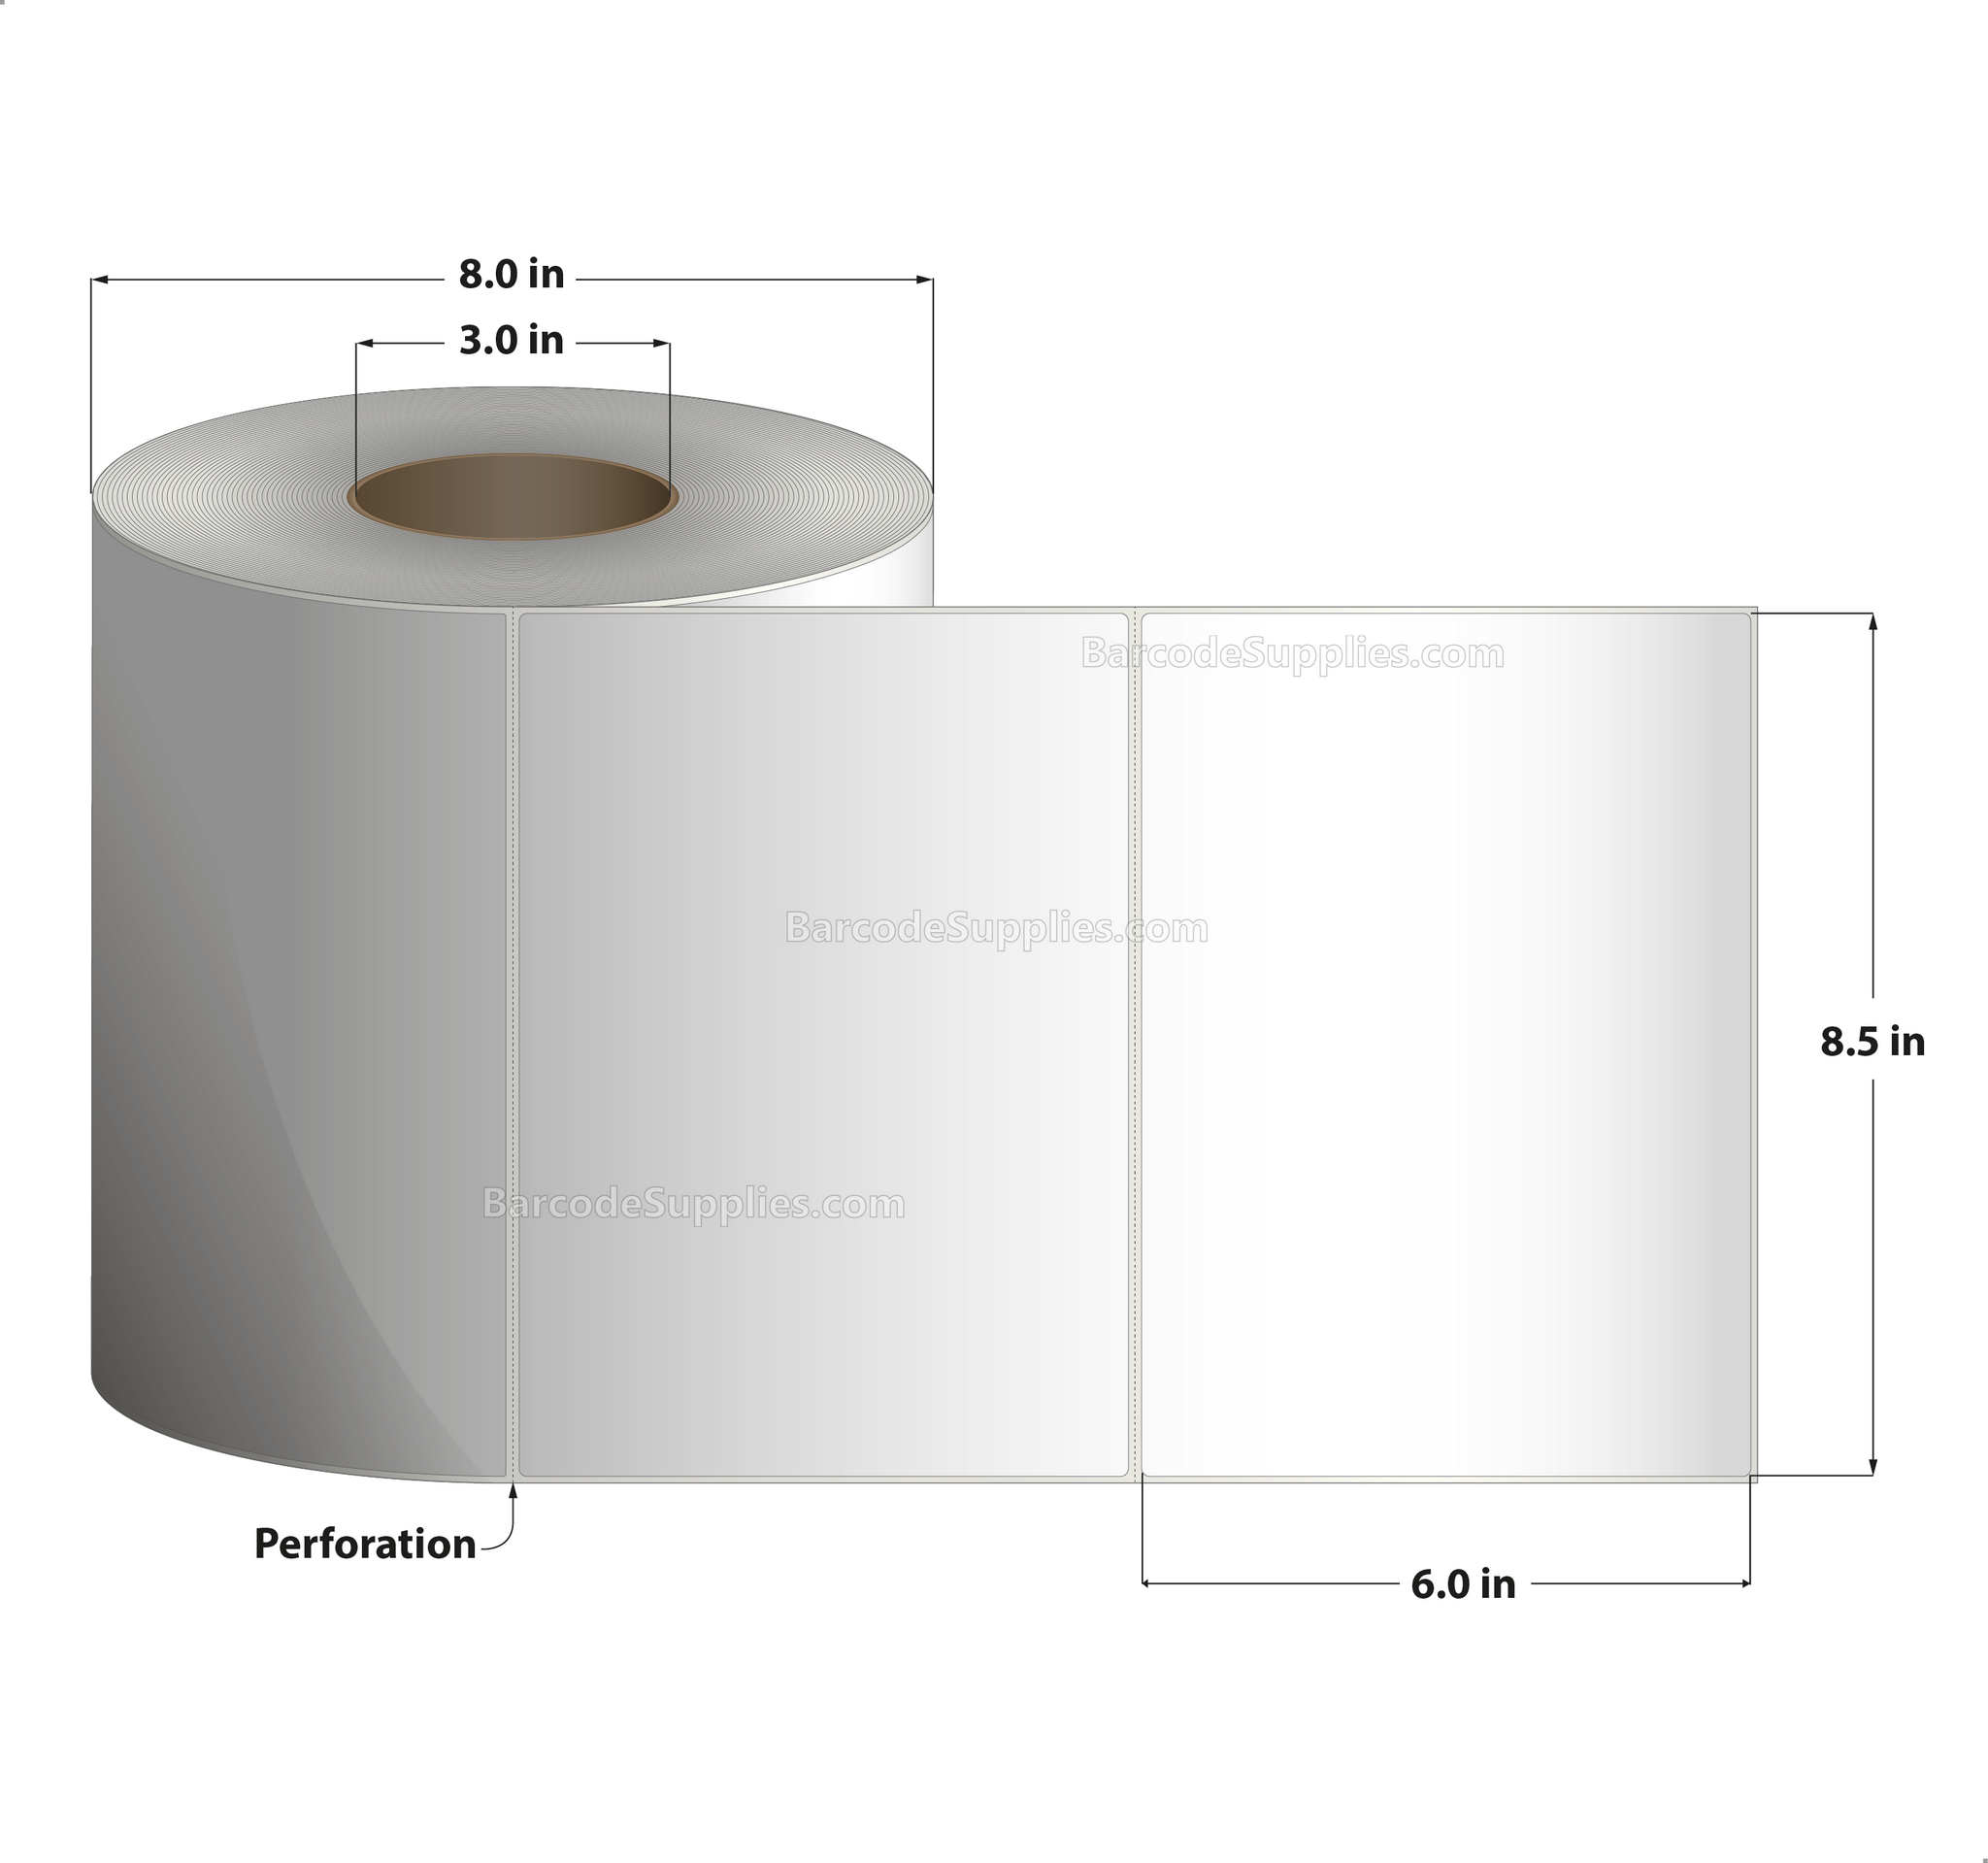 8.5 x 6 Thermal Transfer White Labels With Permanent Adhesive - Perforated - 1000 Labels Per Roll - Carton Of 4 Rolls - 4000 Labels Total - MPN: RT-85-6-1000-3